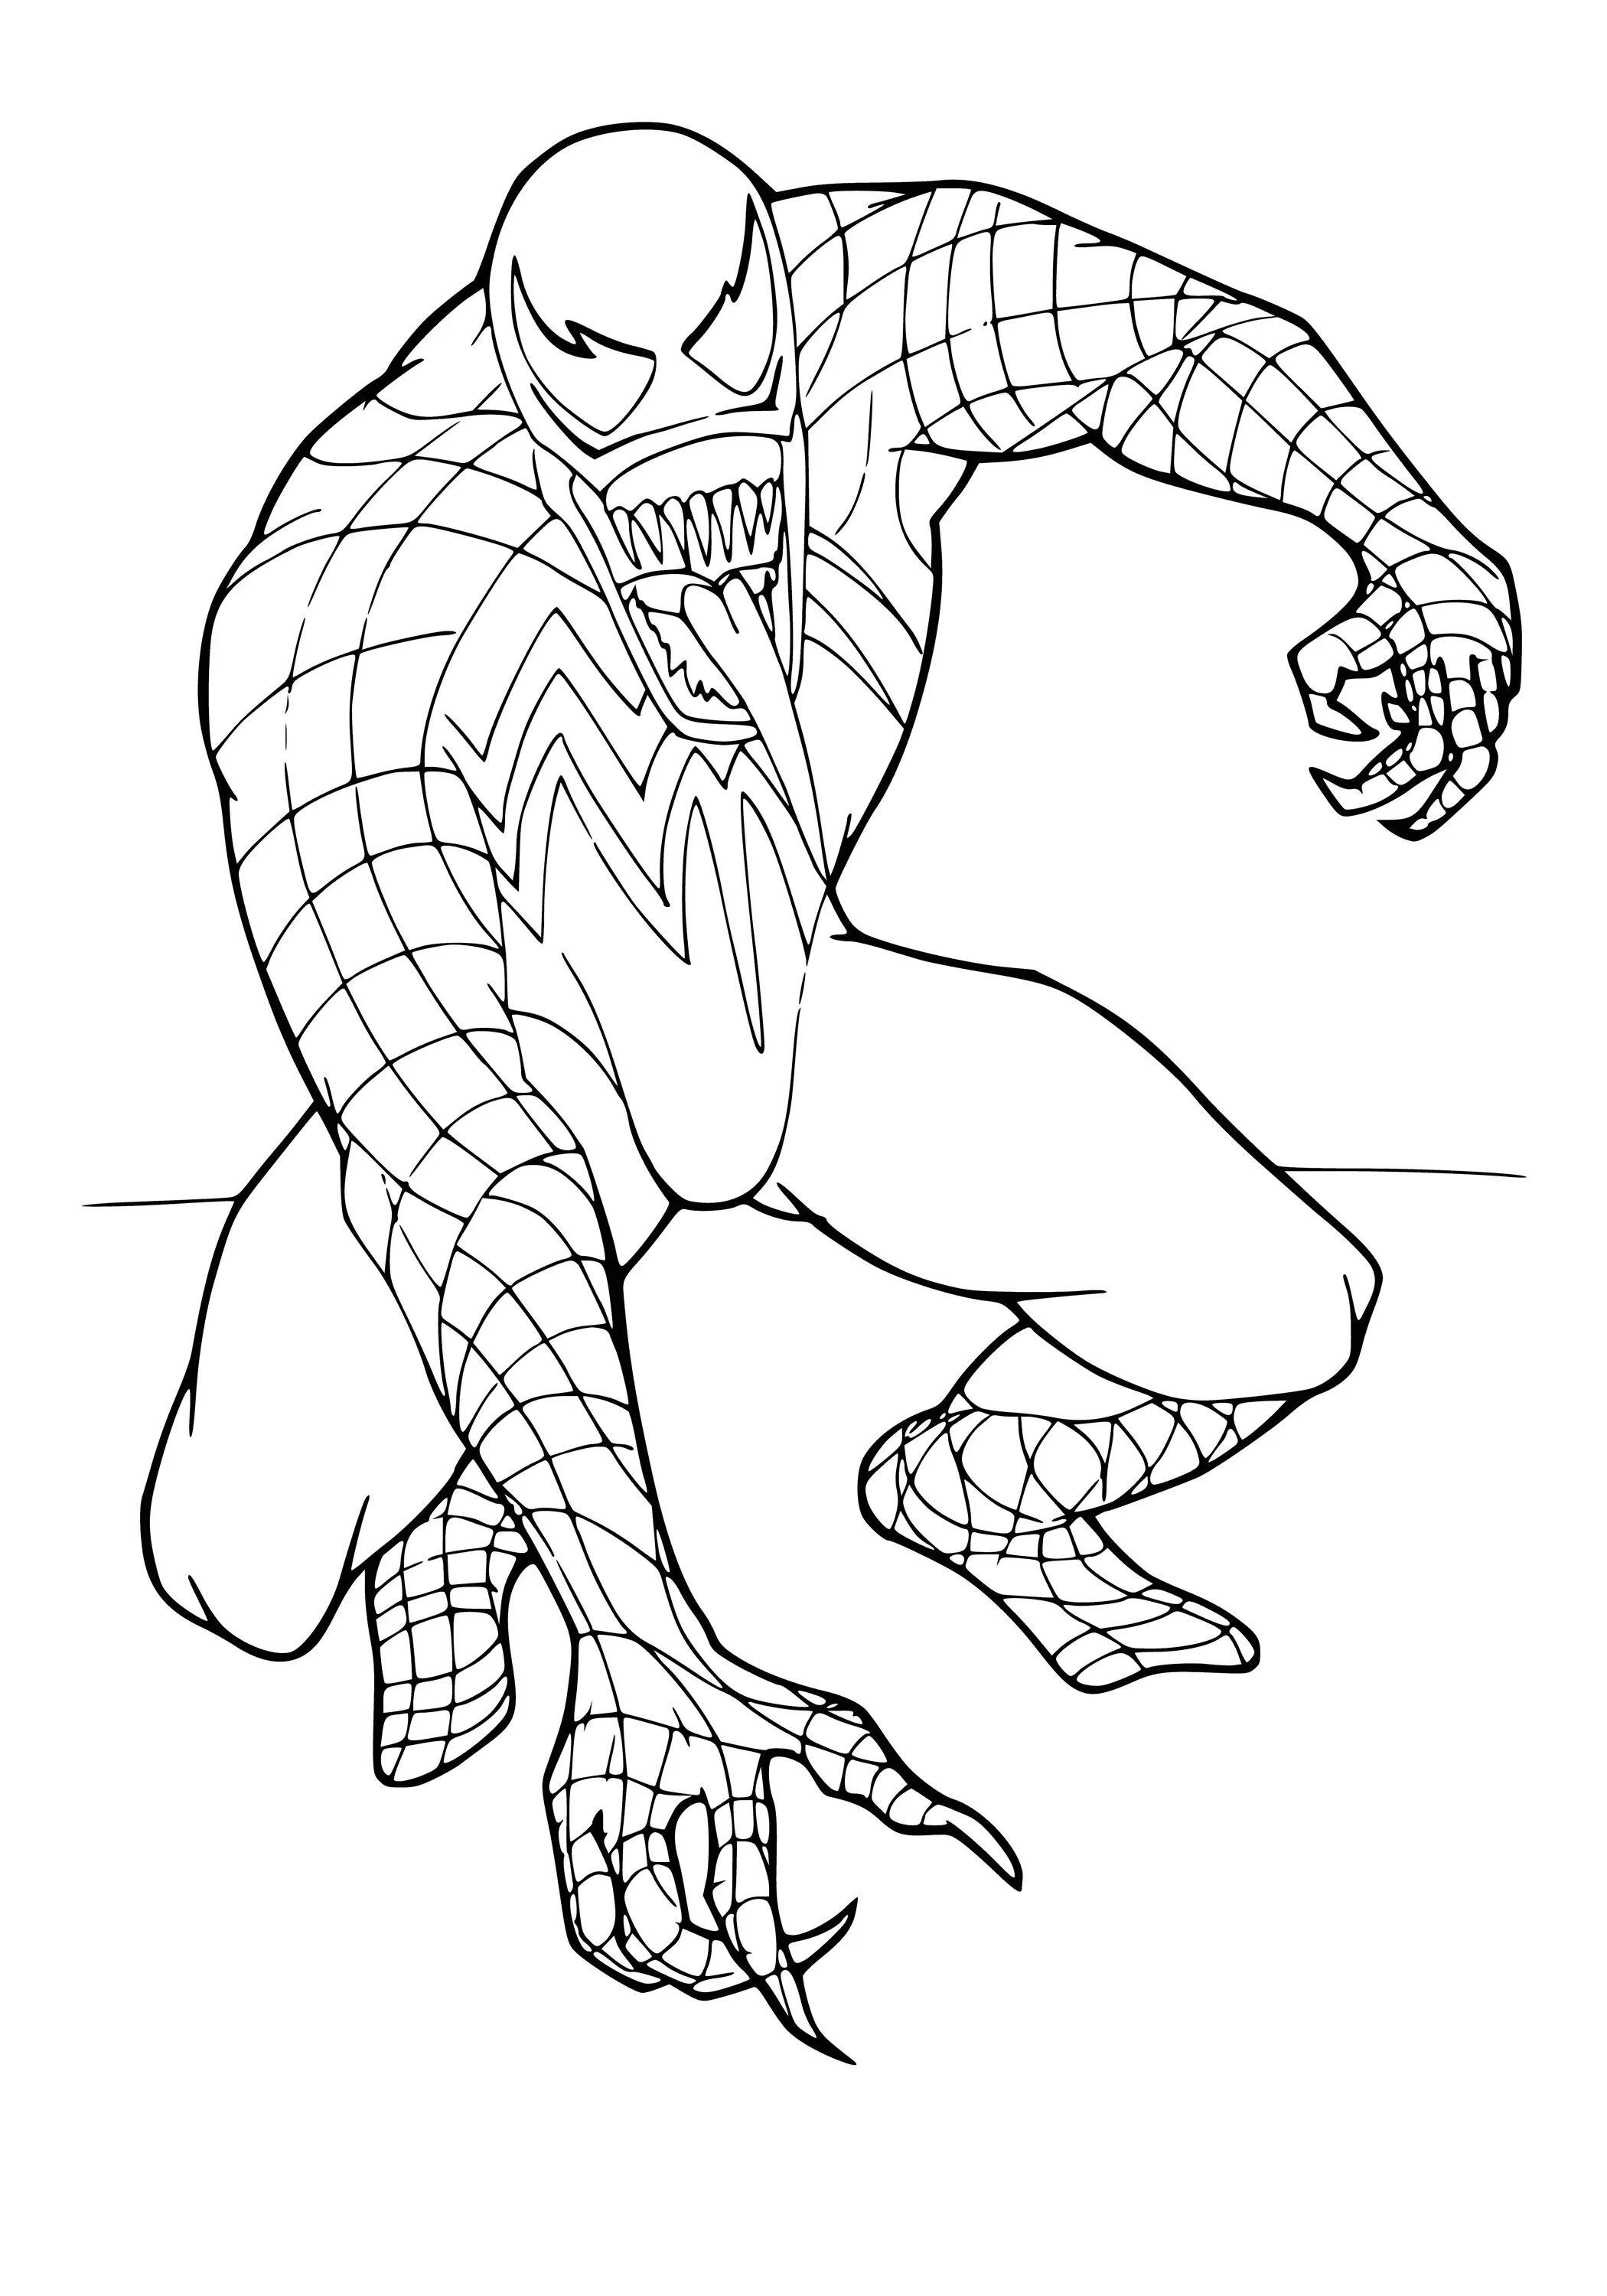 Super spiderman coloring book for kids